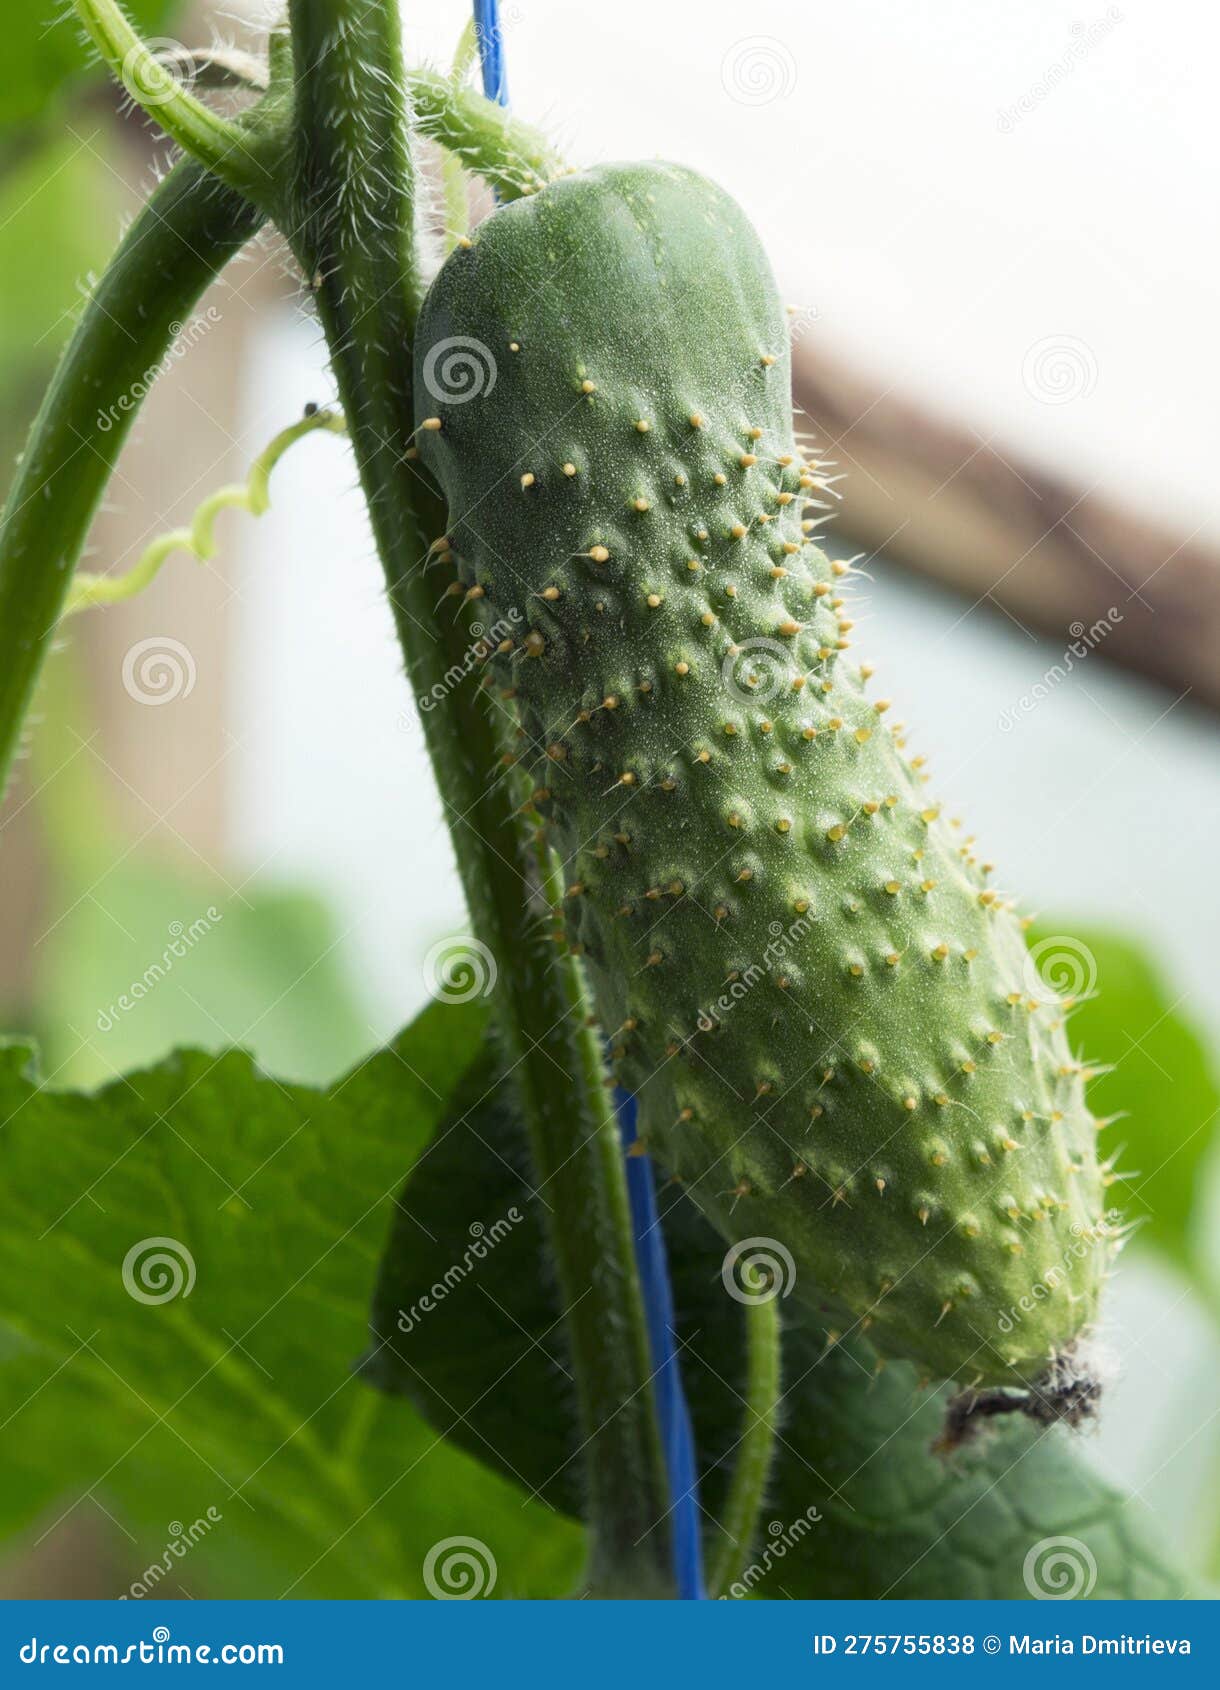 Closeup View Of A Cucumber Cucumis Sativus Growing On Vines Stock